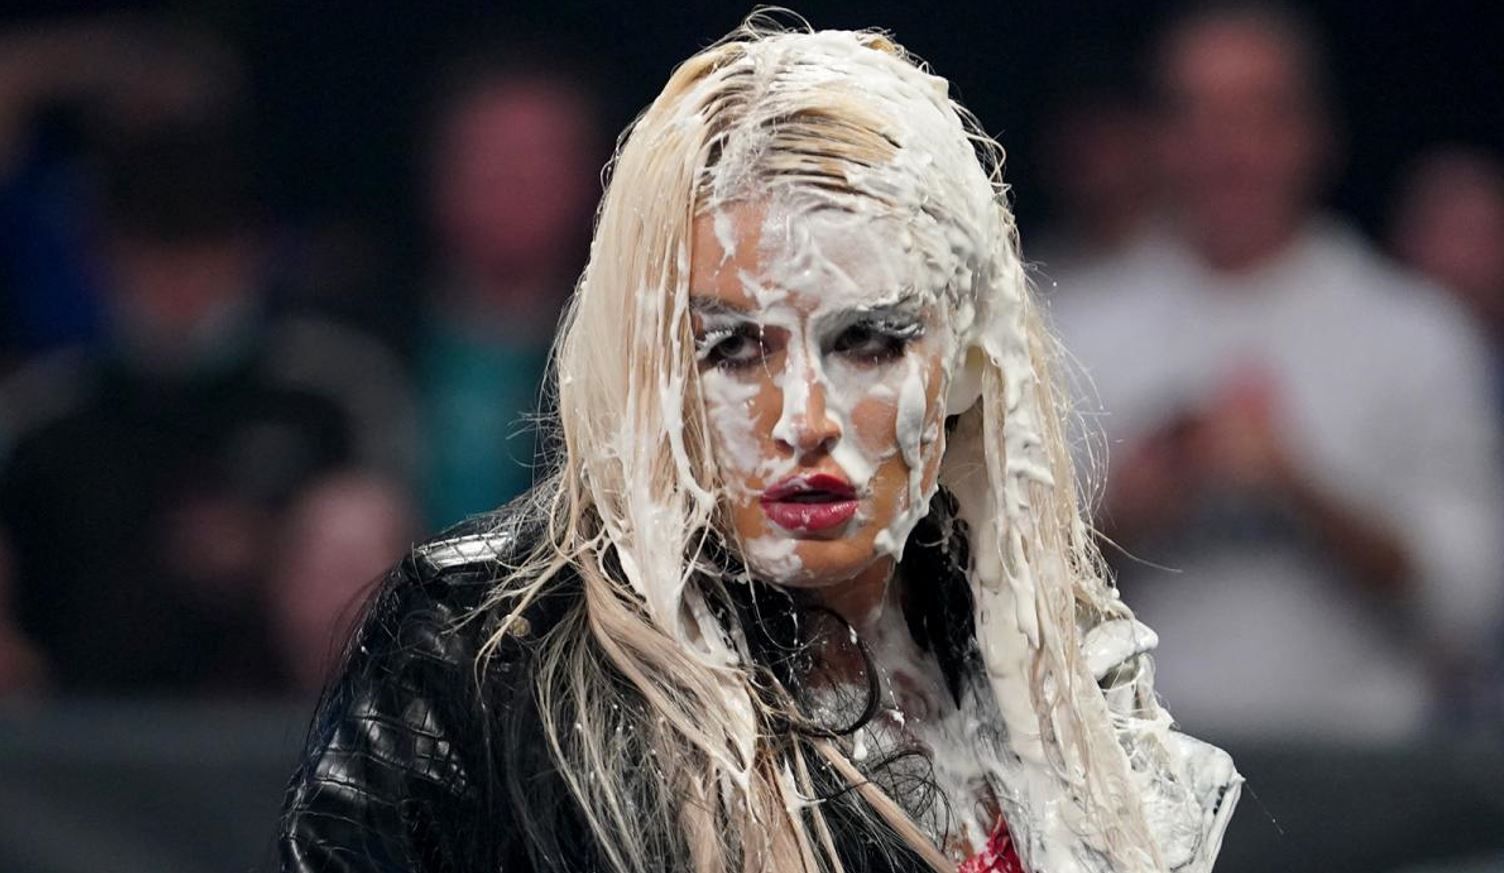 Toni Storm was humiliated by Charlotte Flair this week